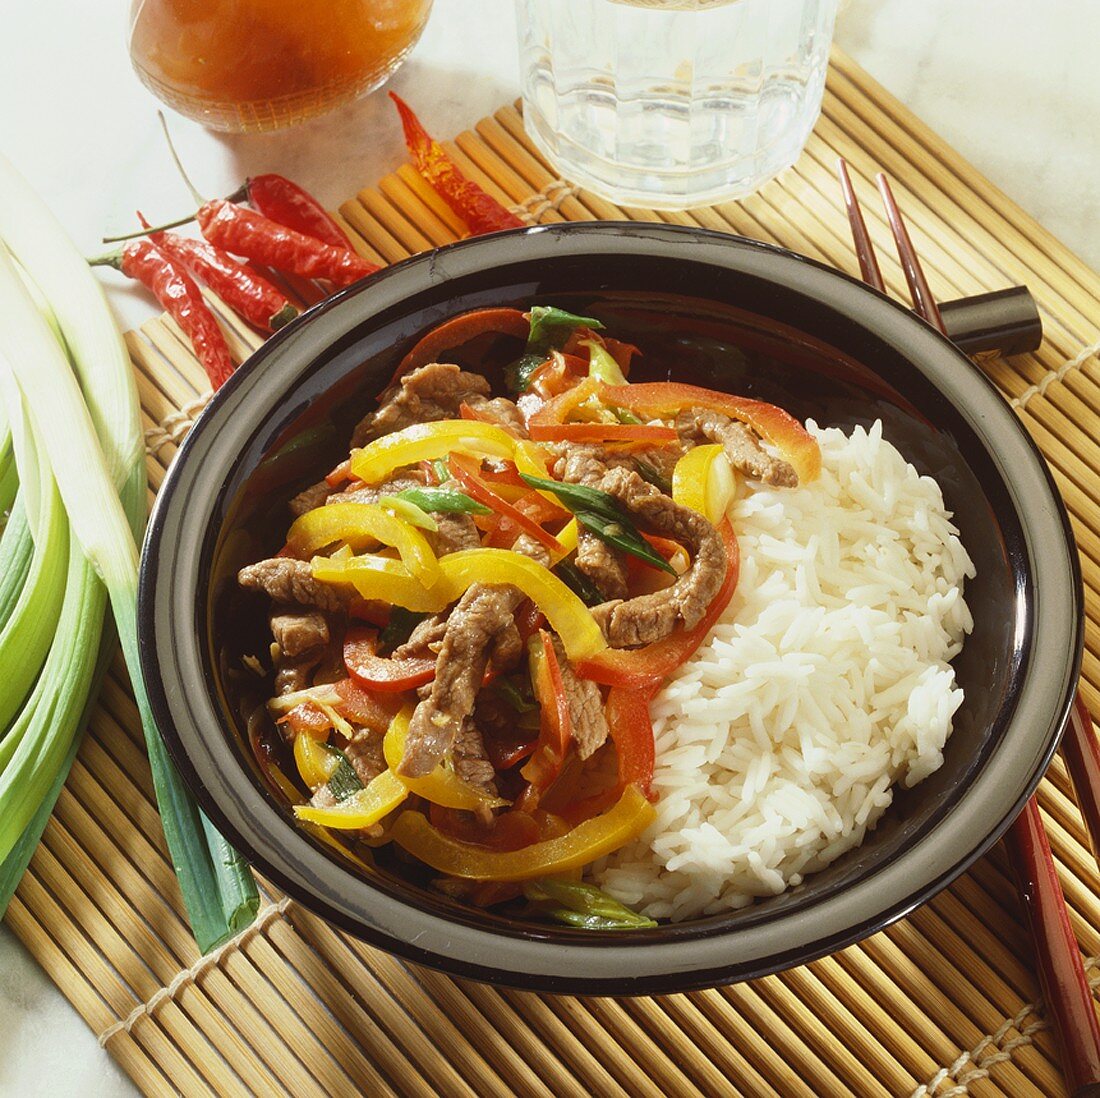 Stir-fried meat, peppers and spring onions